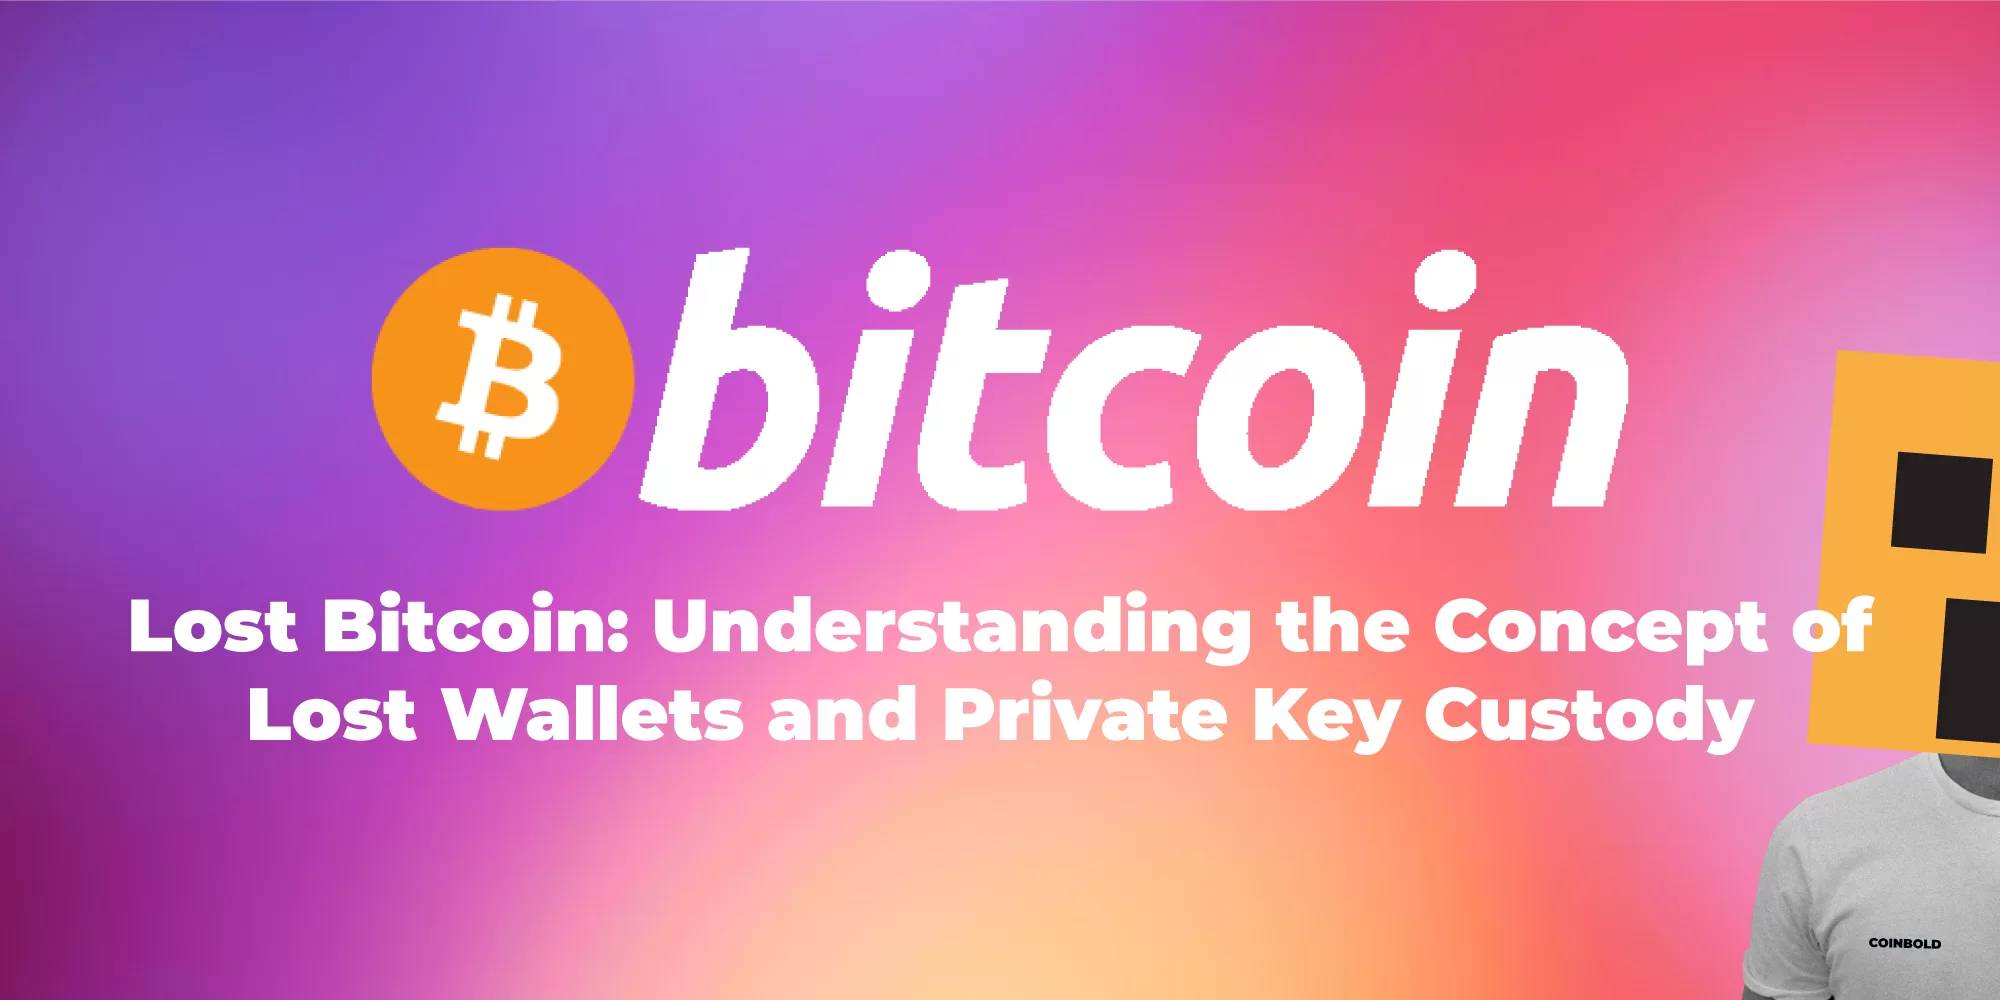 Lost Bitcoin: Understanding the Concept of Lost Wallets and Private Key Custody